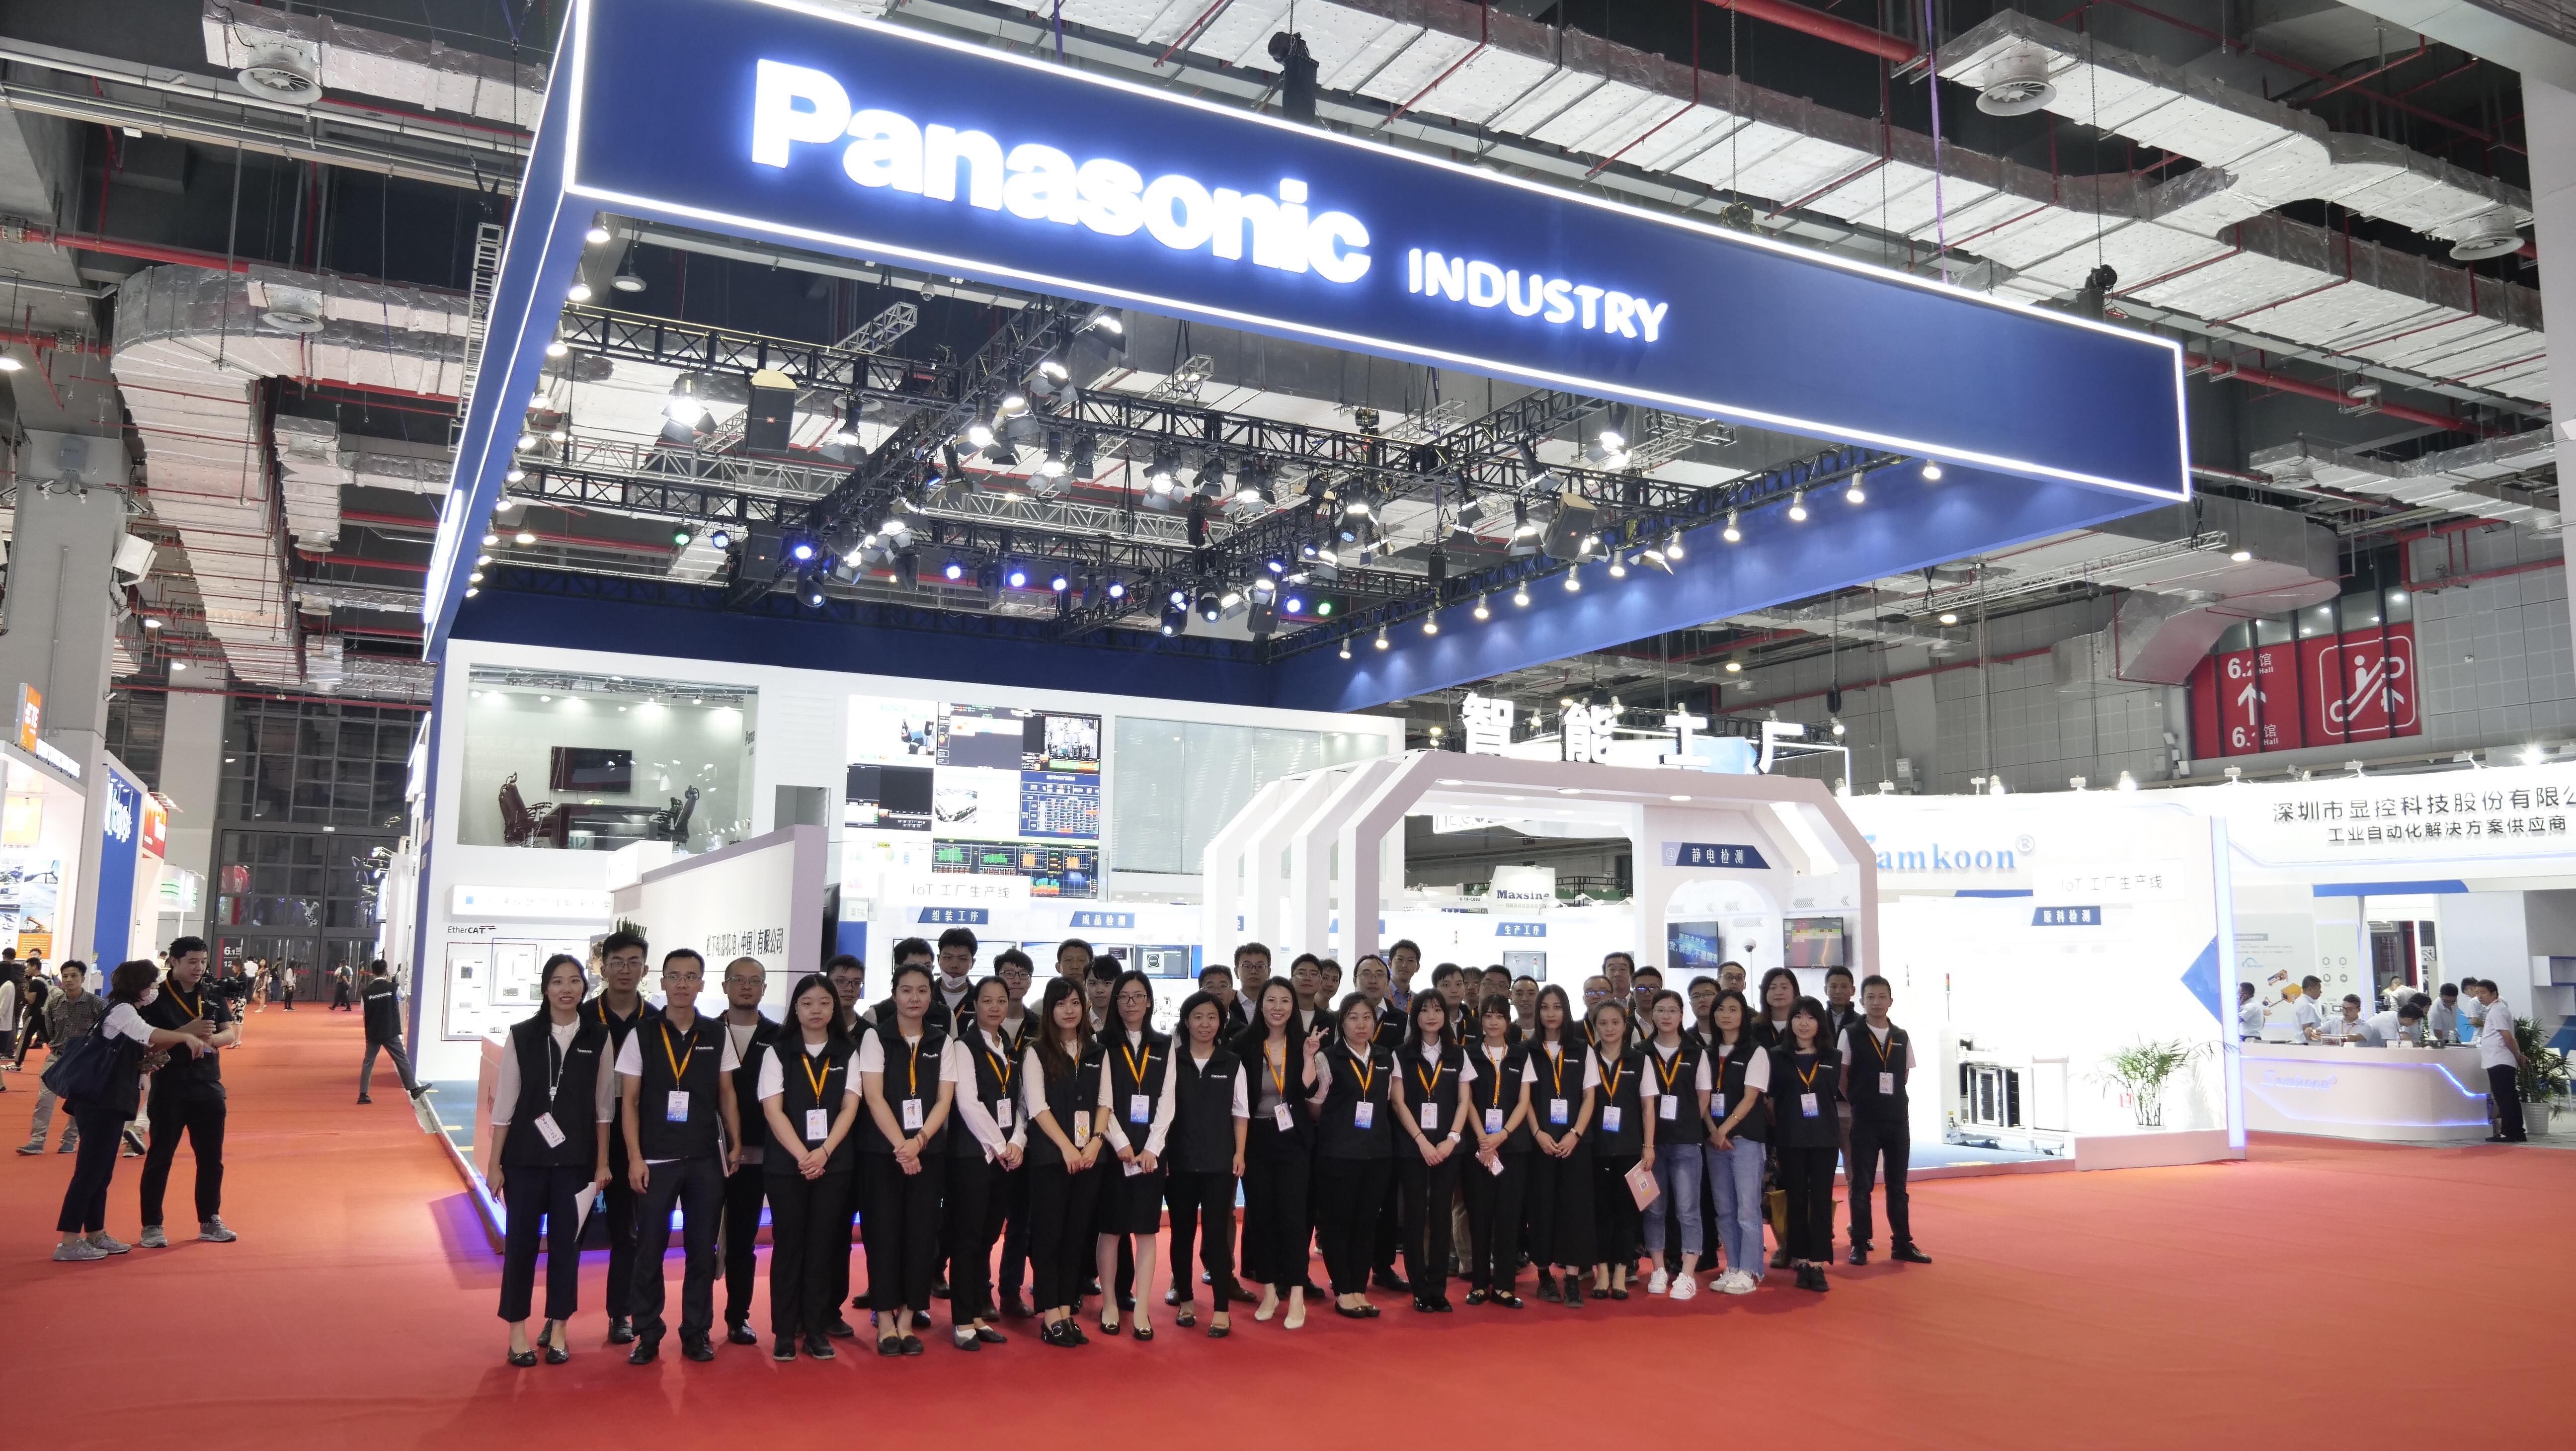 photo: Panasonic also introduced its device business brand 